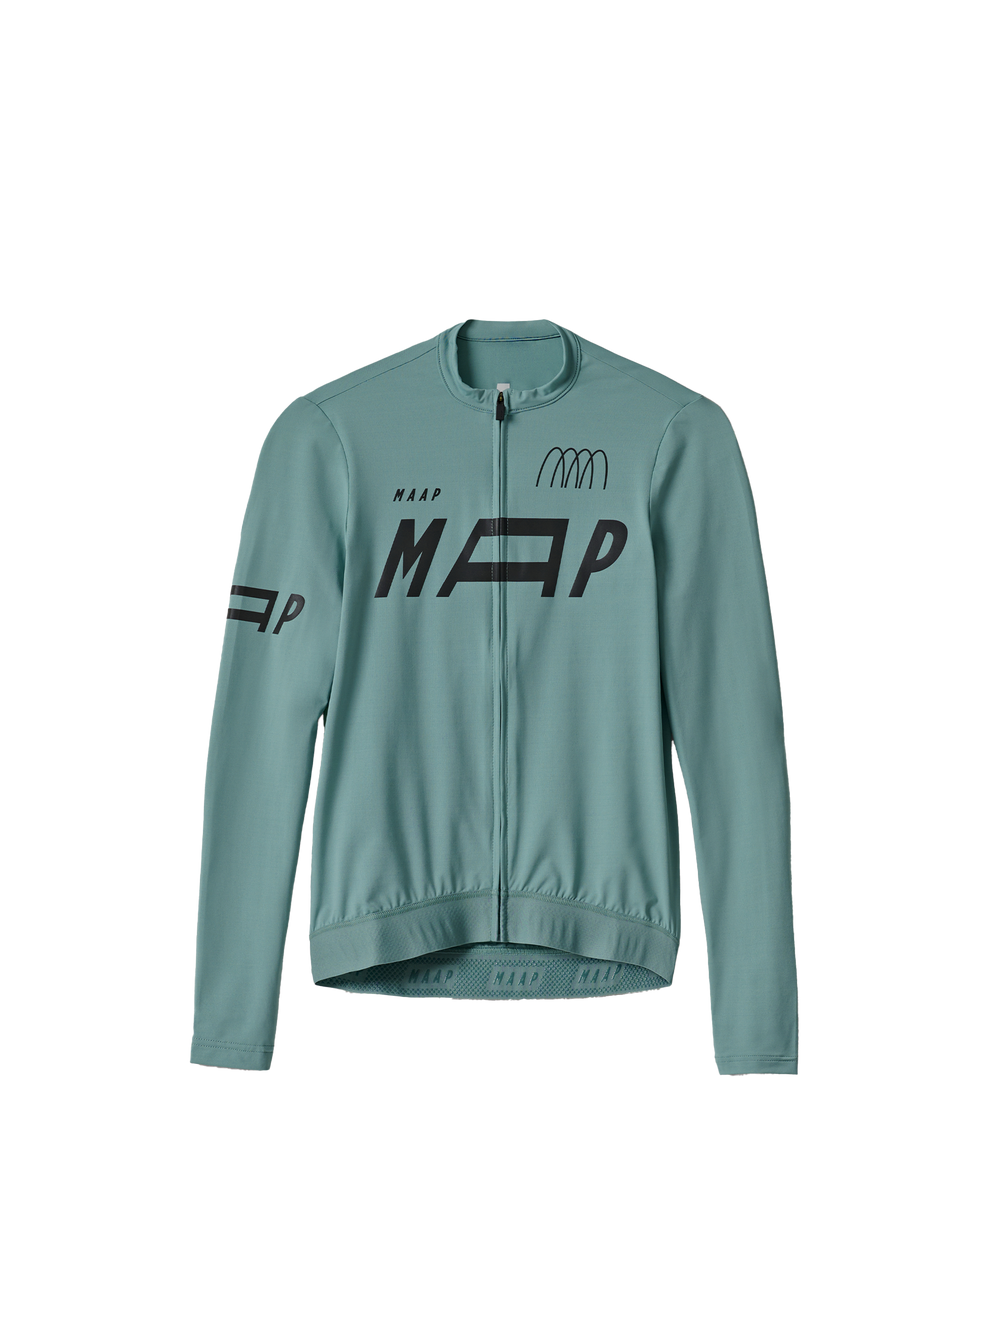 Product Image for Women's Adapt LS Jersey